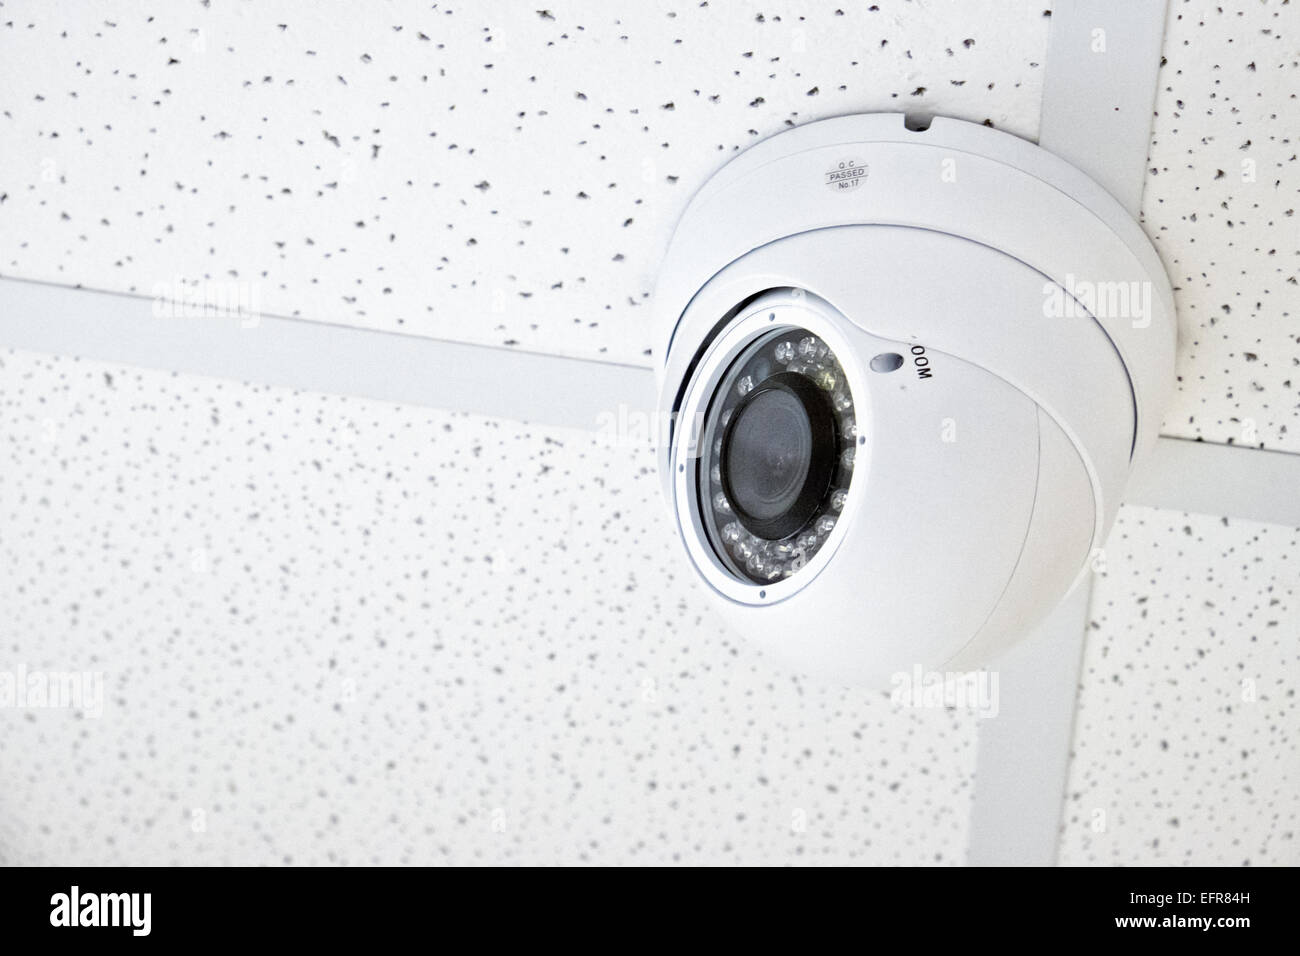 A small infra red capable night vision cctv security camera attached to a ceiling of a retail store Stock Photo